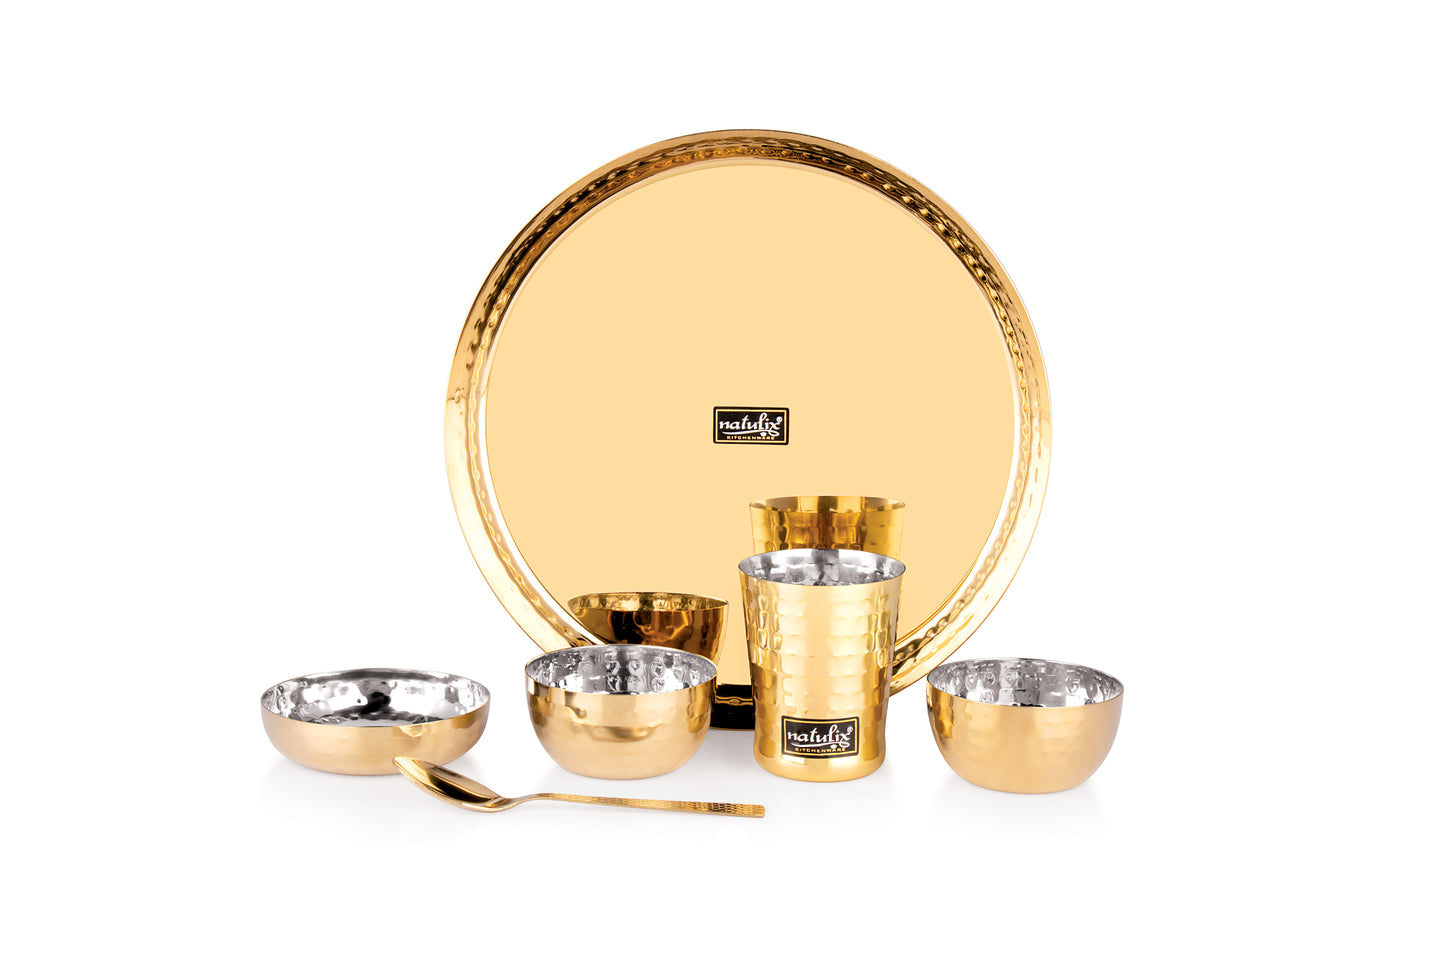 NATULIX Royal Stainless Steel Gold Hammered Finish Dinner Set of 6 Pcs ( 1 Thali, 2 Bowl, 1 Sweet Plate, 1 Spoon & 1 Glass)